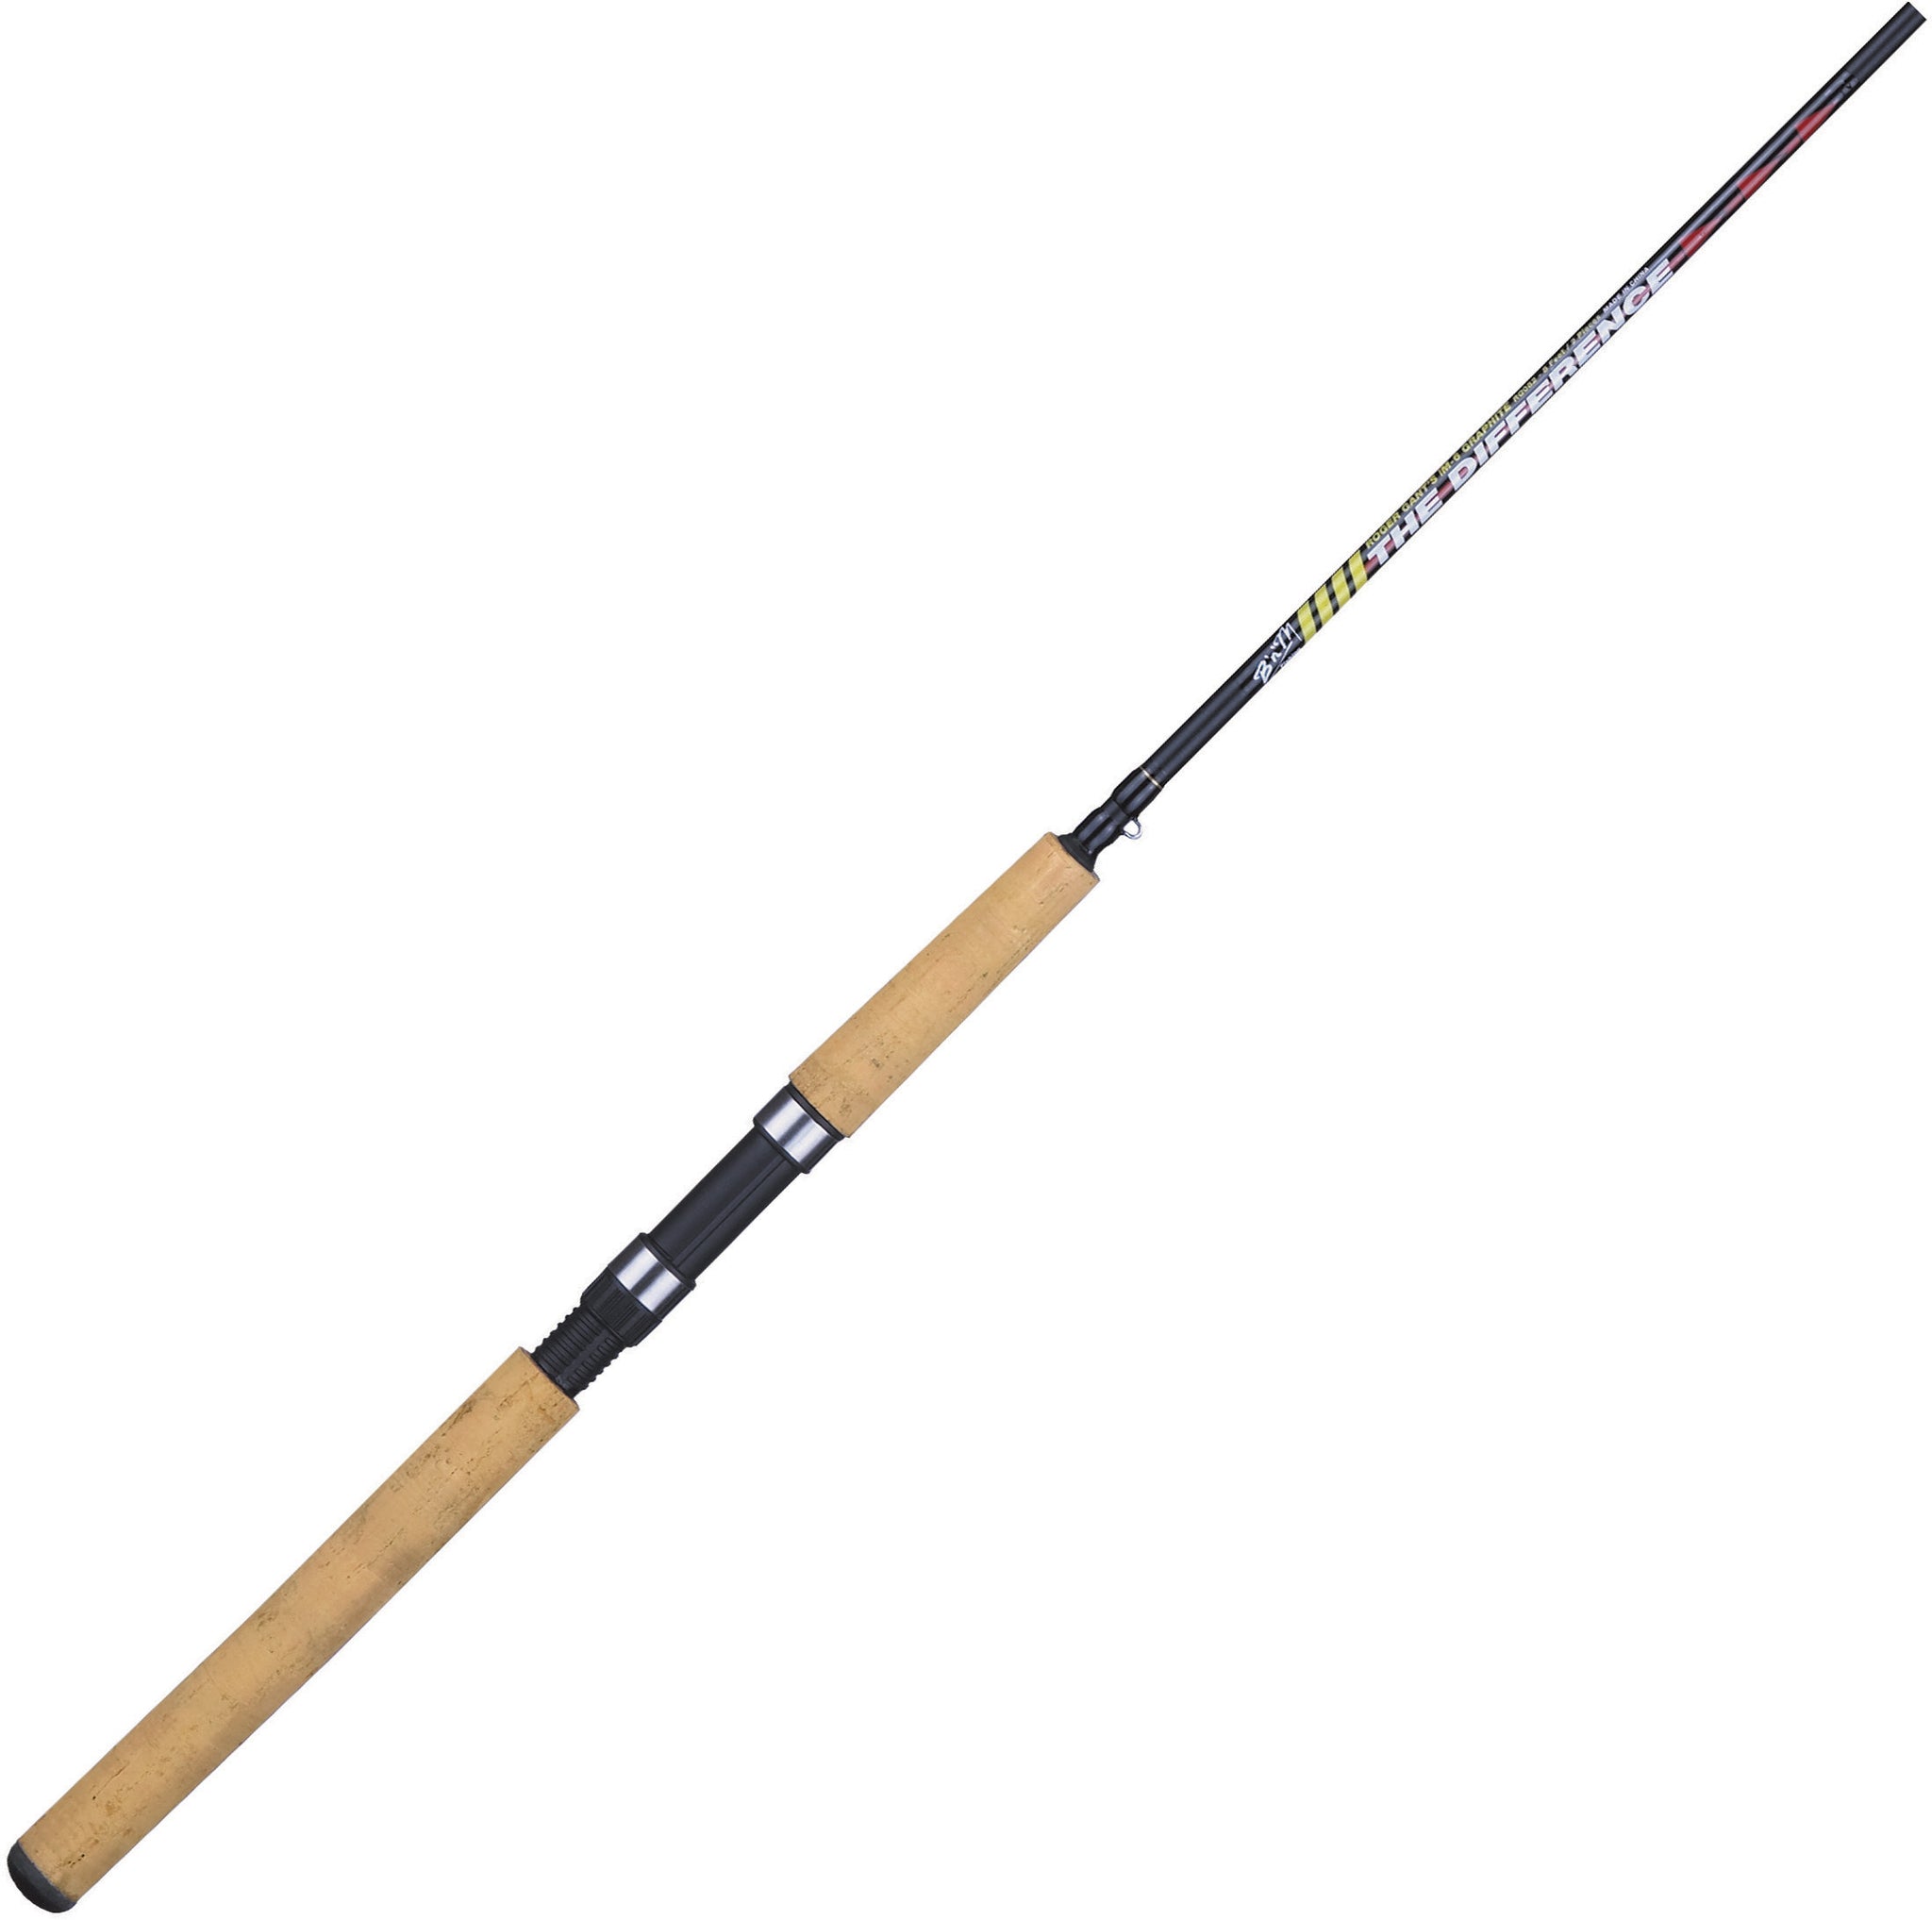  B&M Pole Co Jointed Cane Pole 14' 3pc #T143 : Fly Fishing Rods  : Sports & Outdoors